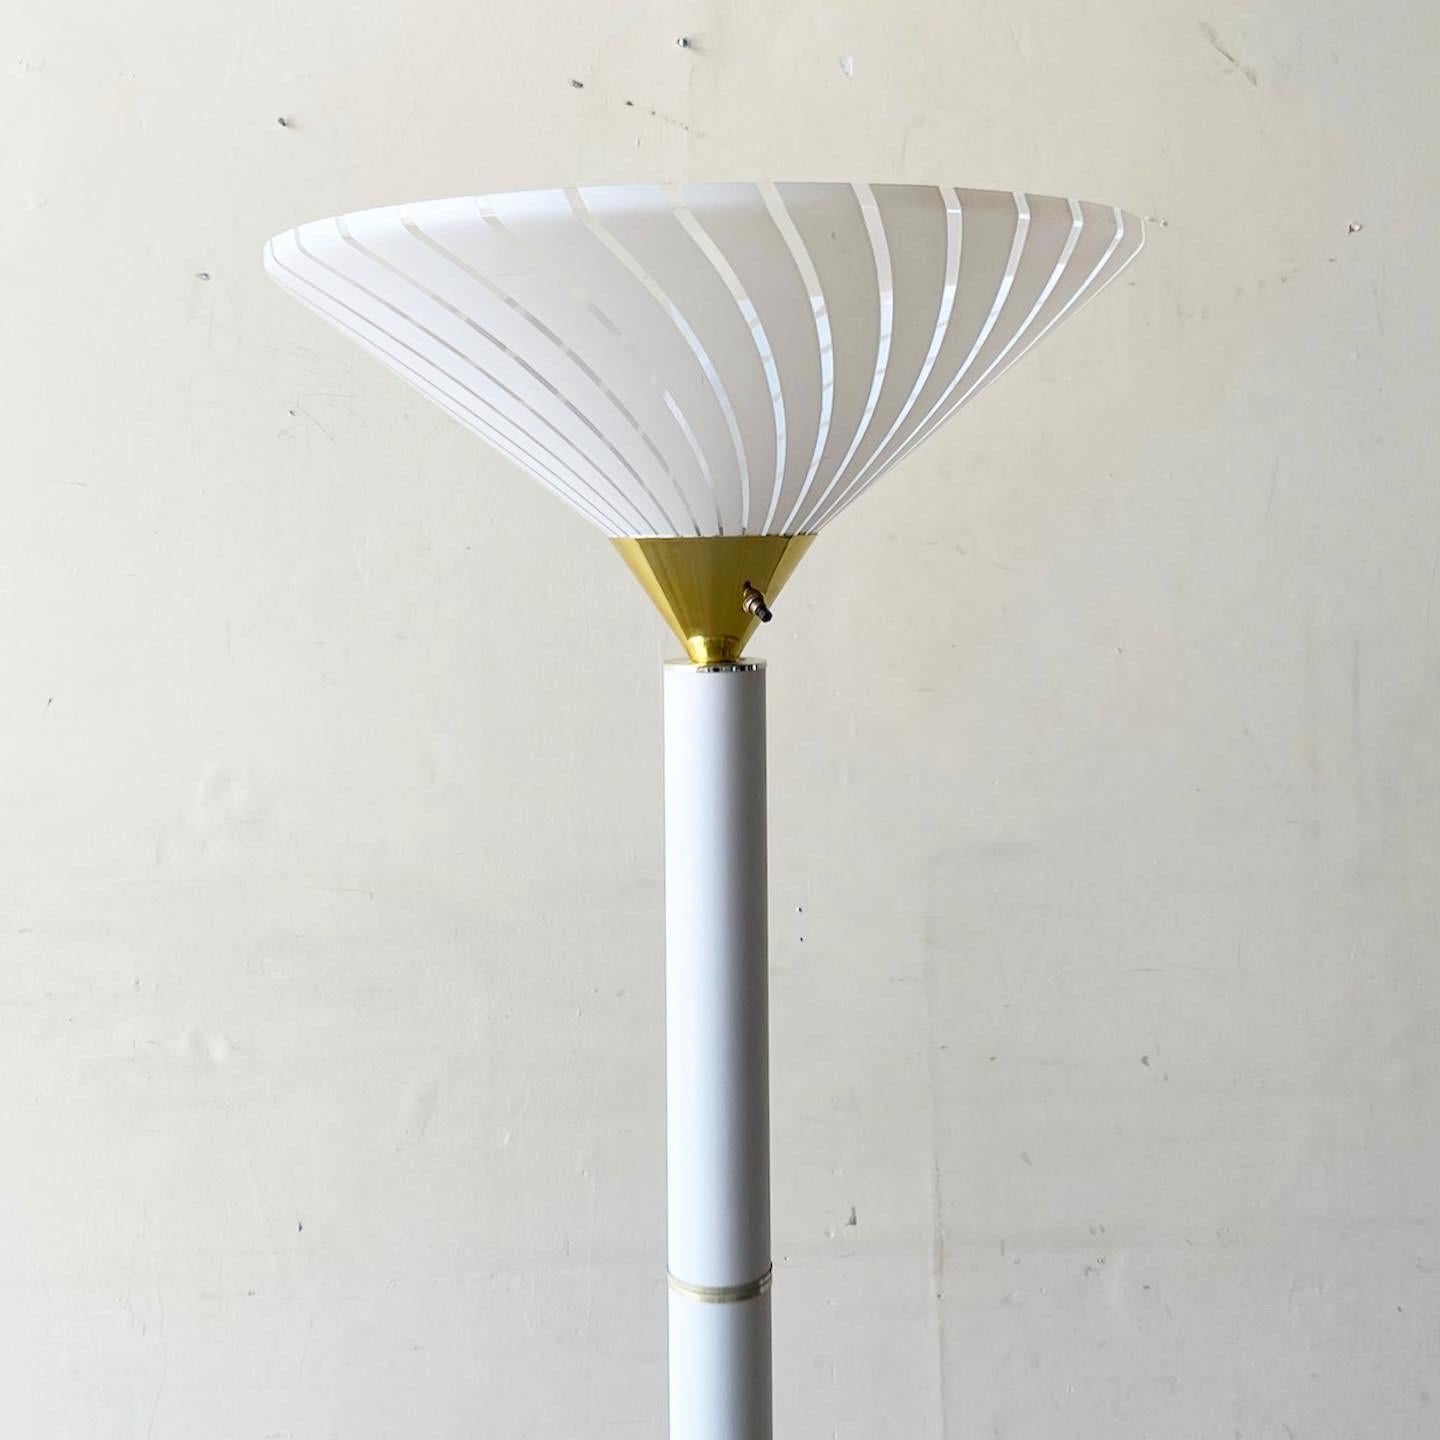 Incredible postmodern floor lamp. Body is white with a white striped lamp shade.